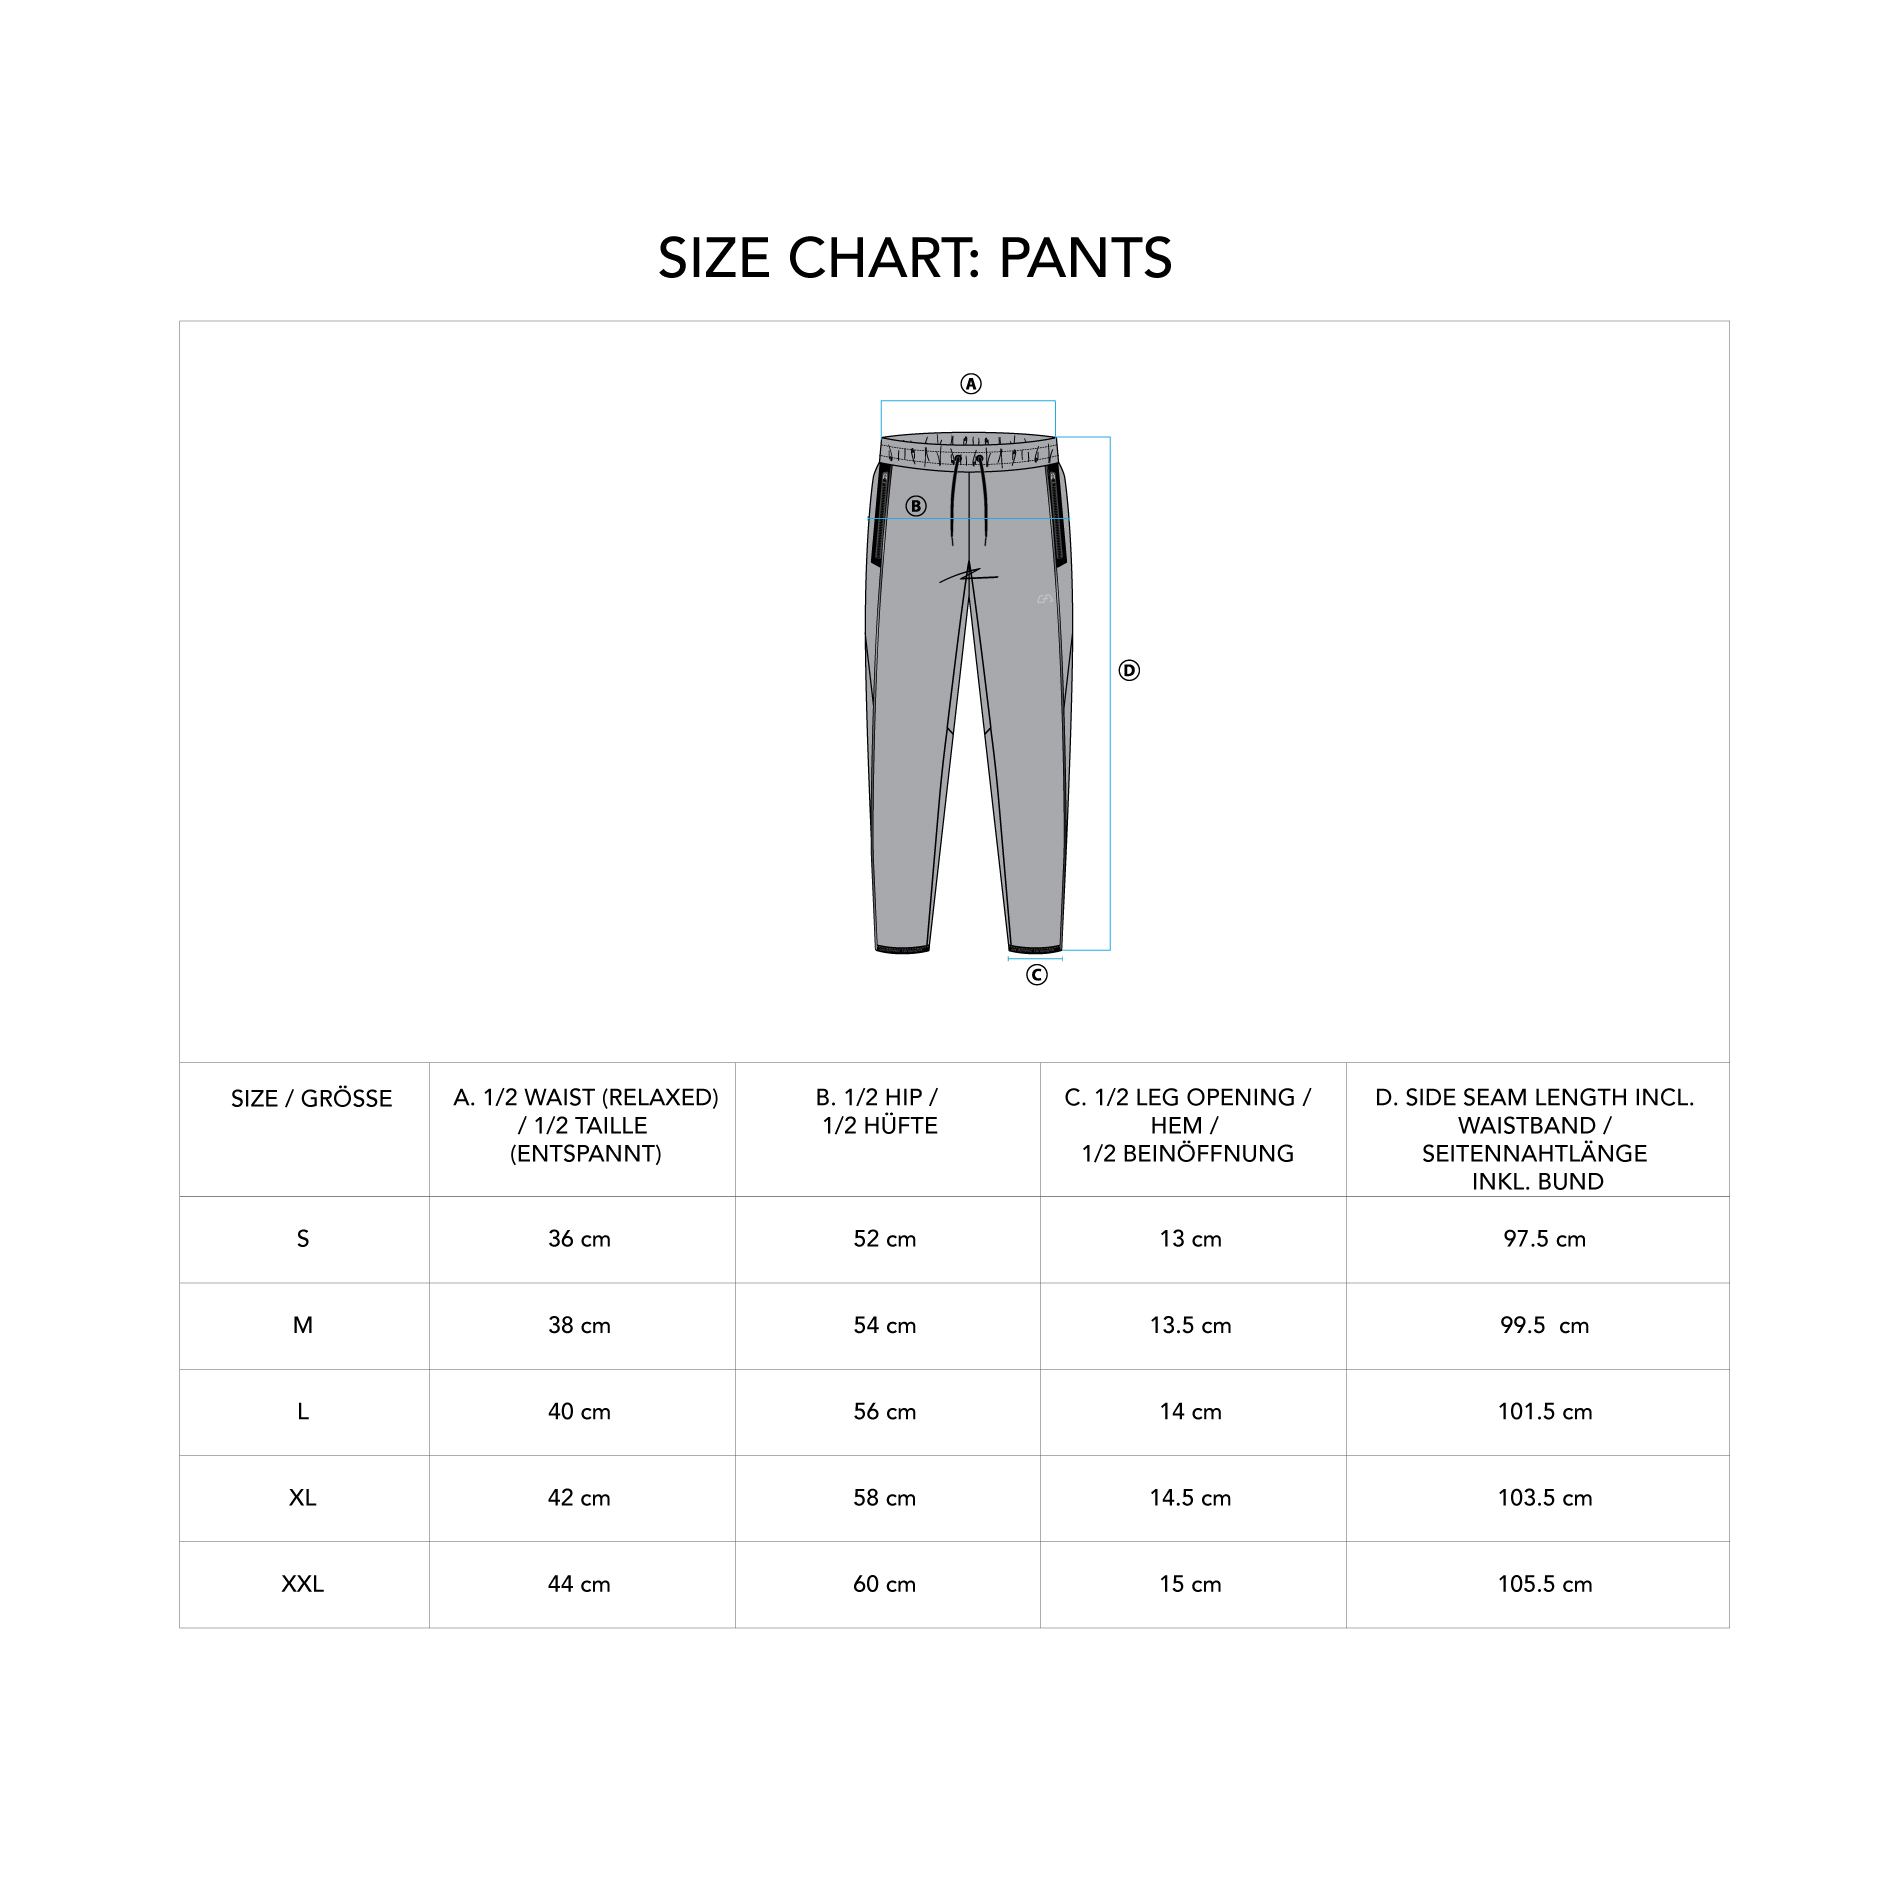 Performance Straight pants for Men - size chart